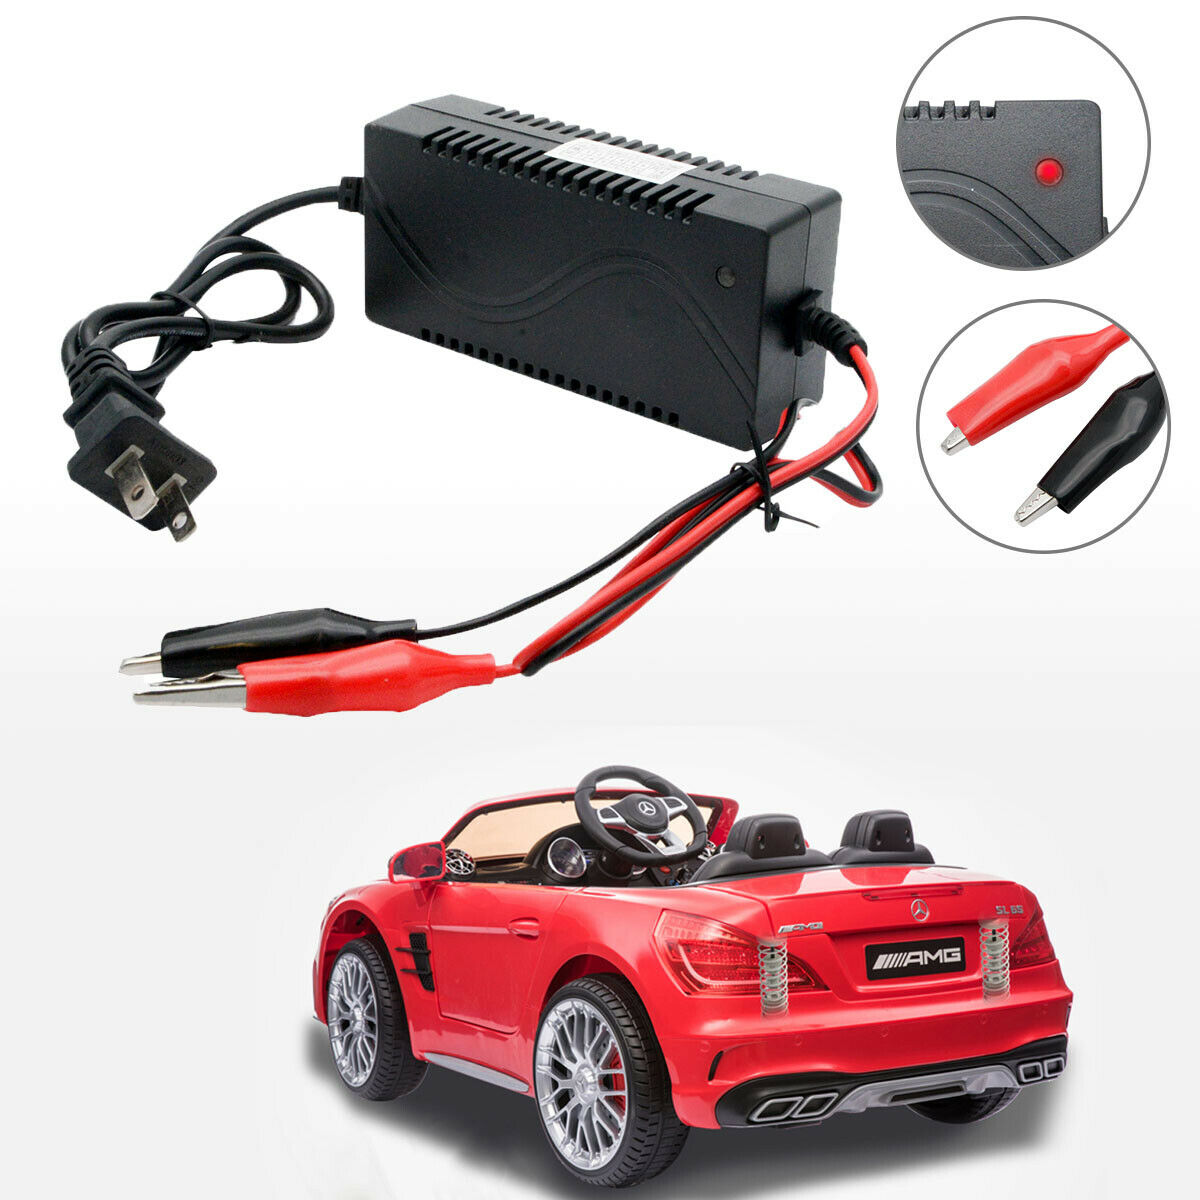 Portable 12V 1A Smart Lead Acid Battery Charger For Toy Car Motorbike Quad Bike Item specifics Cond - Click Image to Close